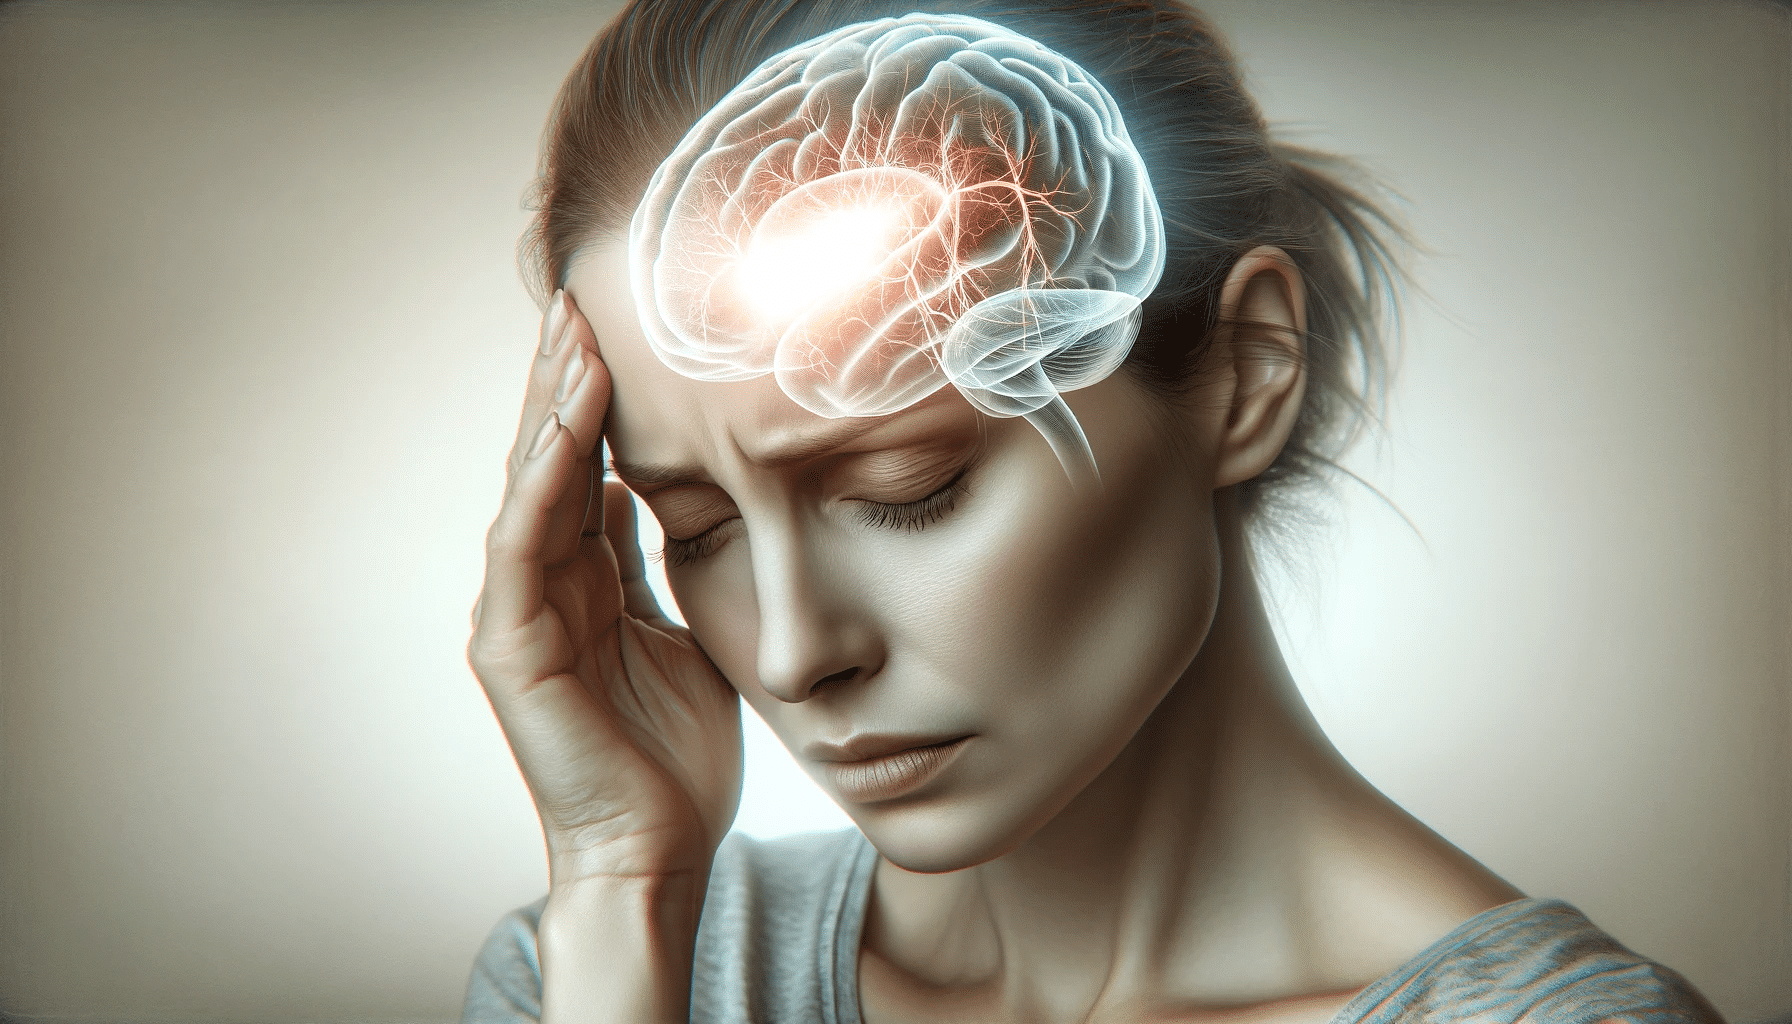 A realistic image portraying a person experiencing a mild headache indicative of migraine. The individual a middle aged Caucasian woman is shown ho